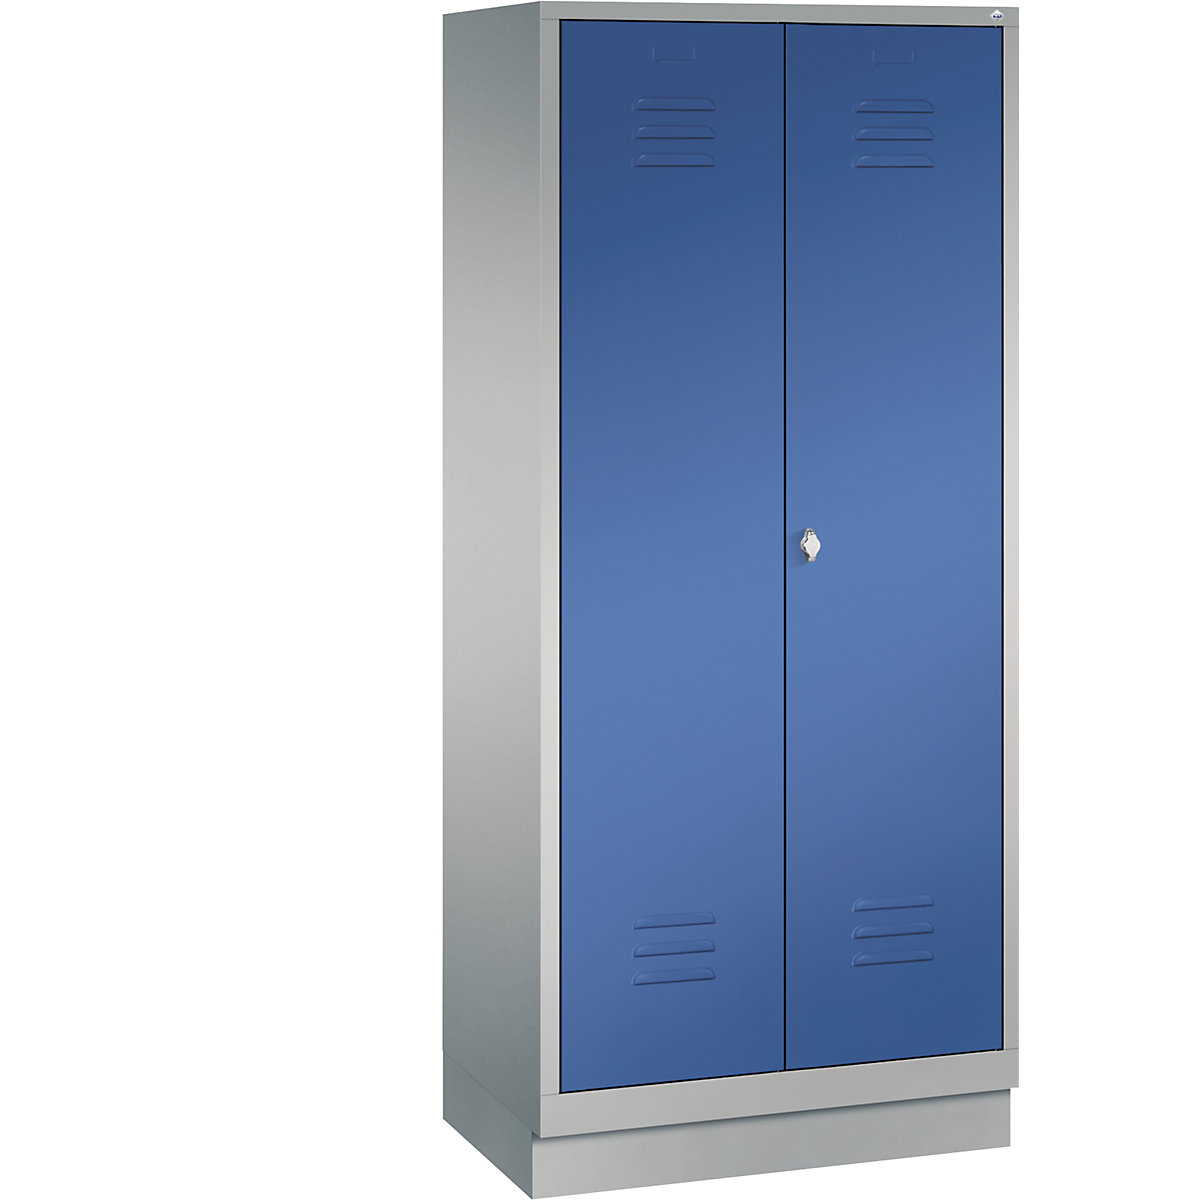 CLASSIC storage cupboard with plinth, doors close in the middle – C+P, 2 compartments, compartment width 400 mm, white aluminium / gentian blue-5